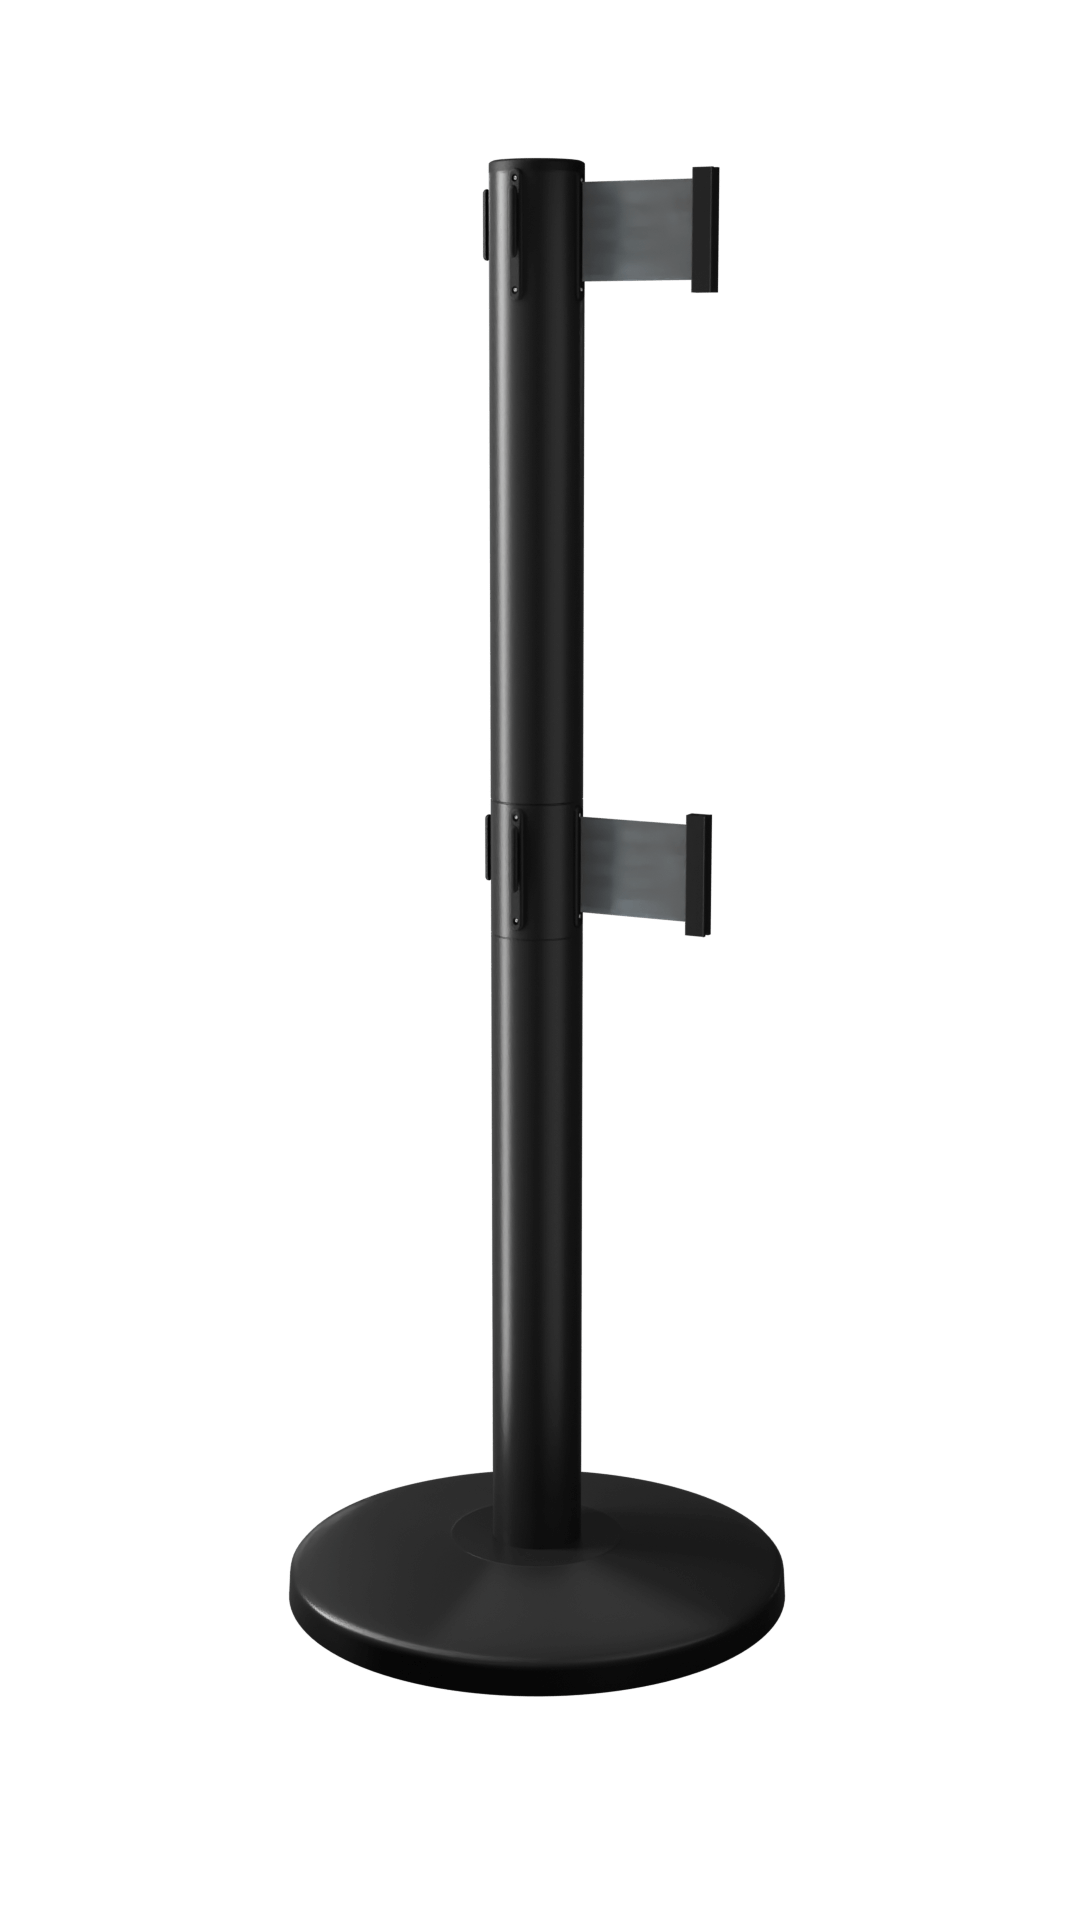 Black QueueMaster Twin 550 used in elevating crowd control XTRA